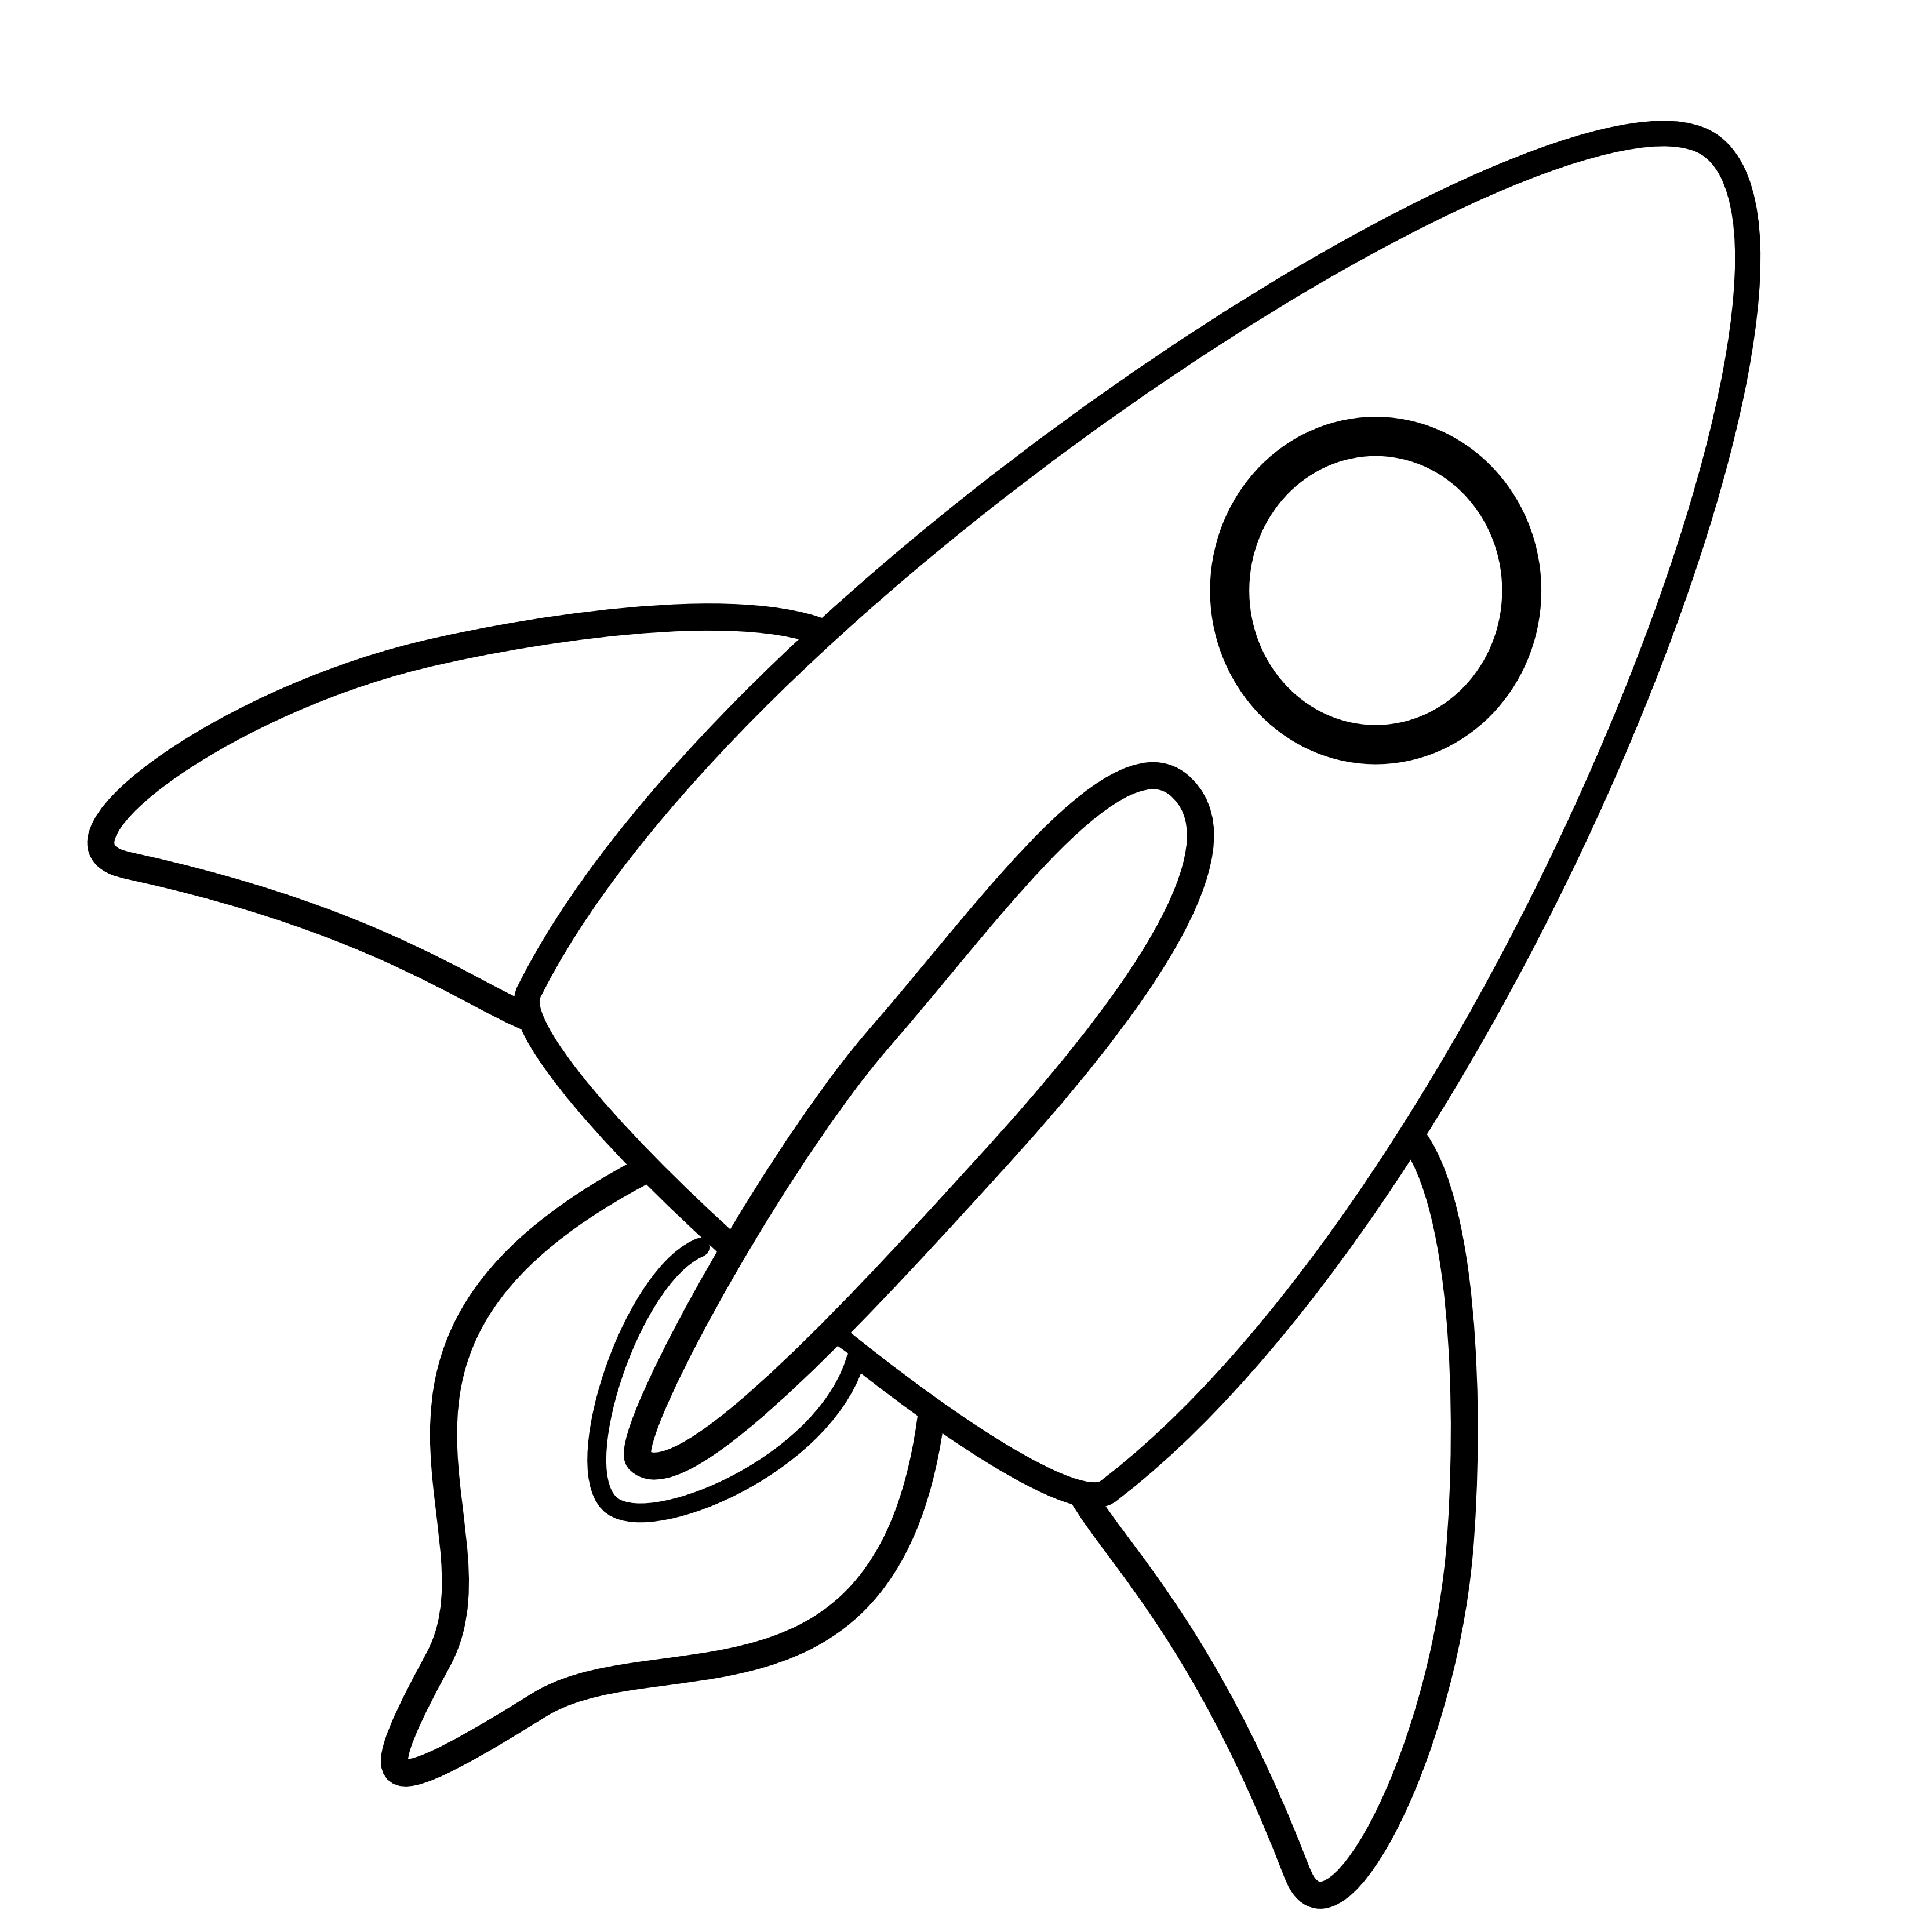 Rocket black and white clipart 7 » Clipart Station.